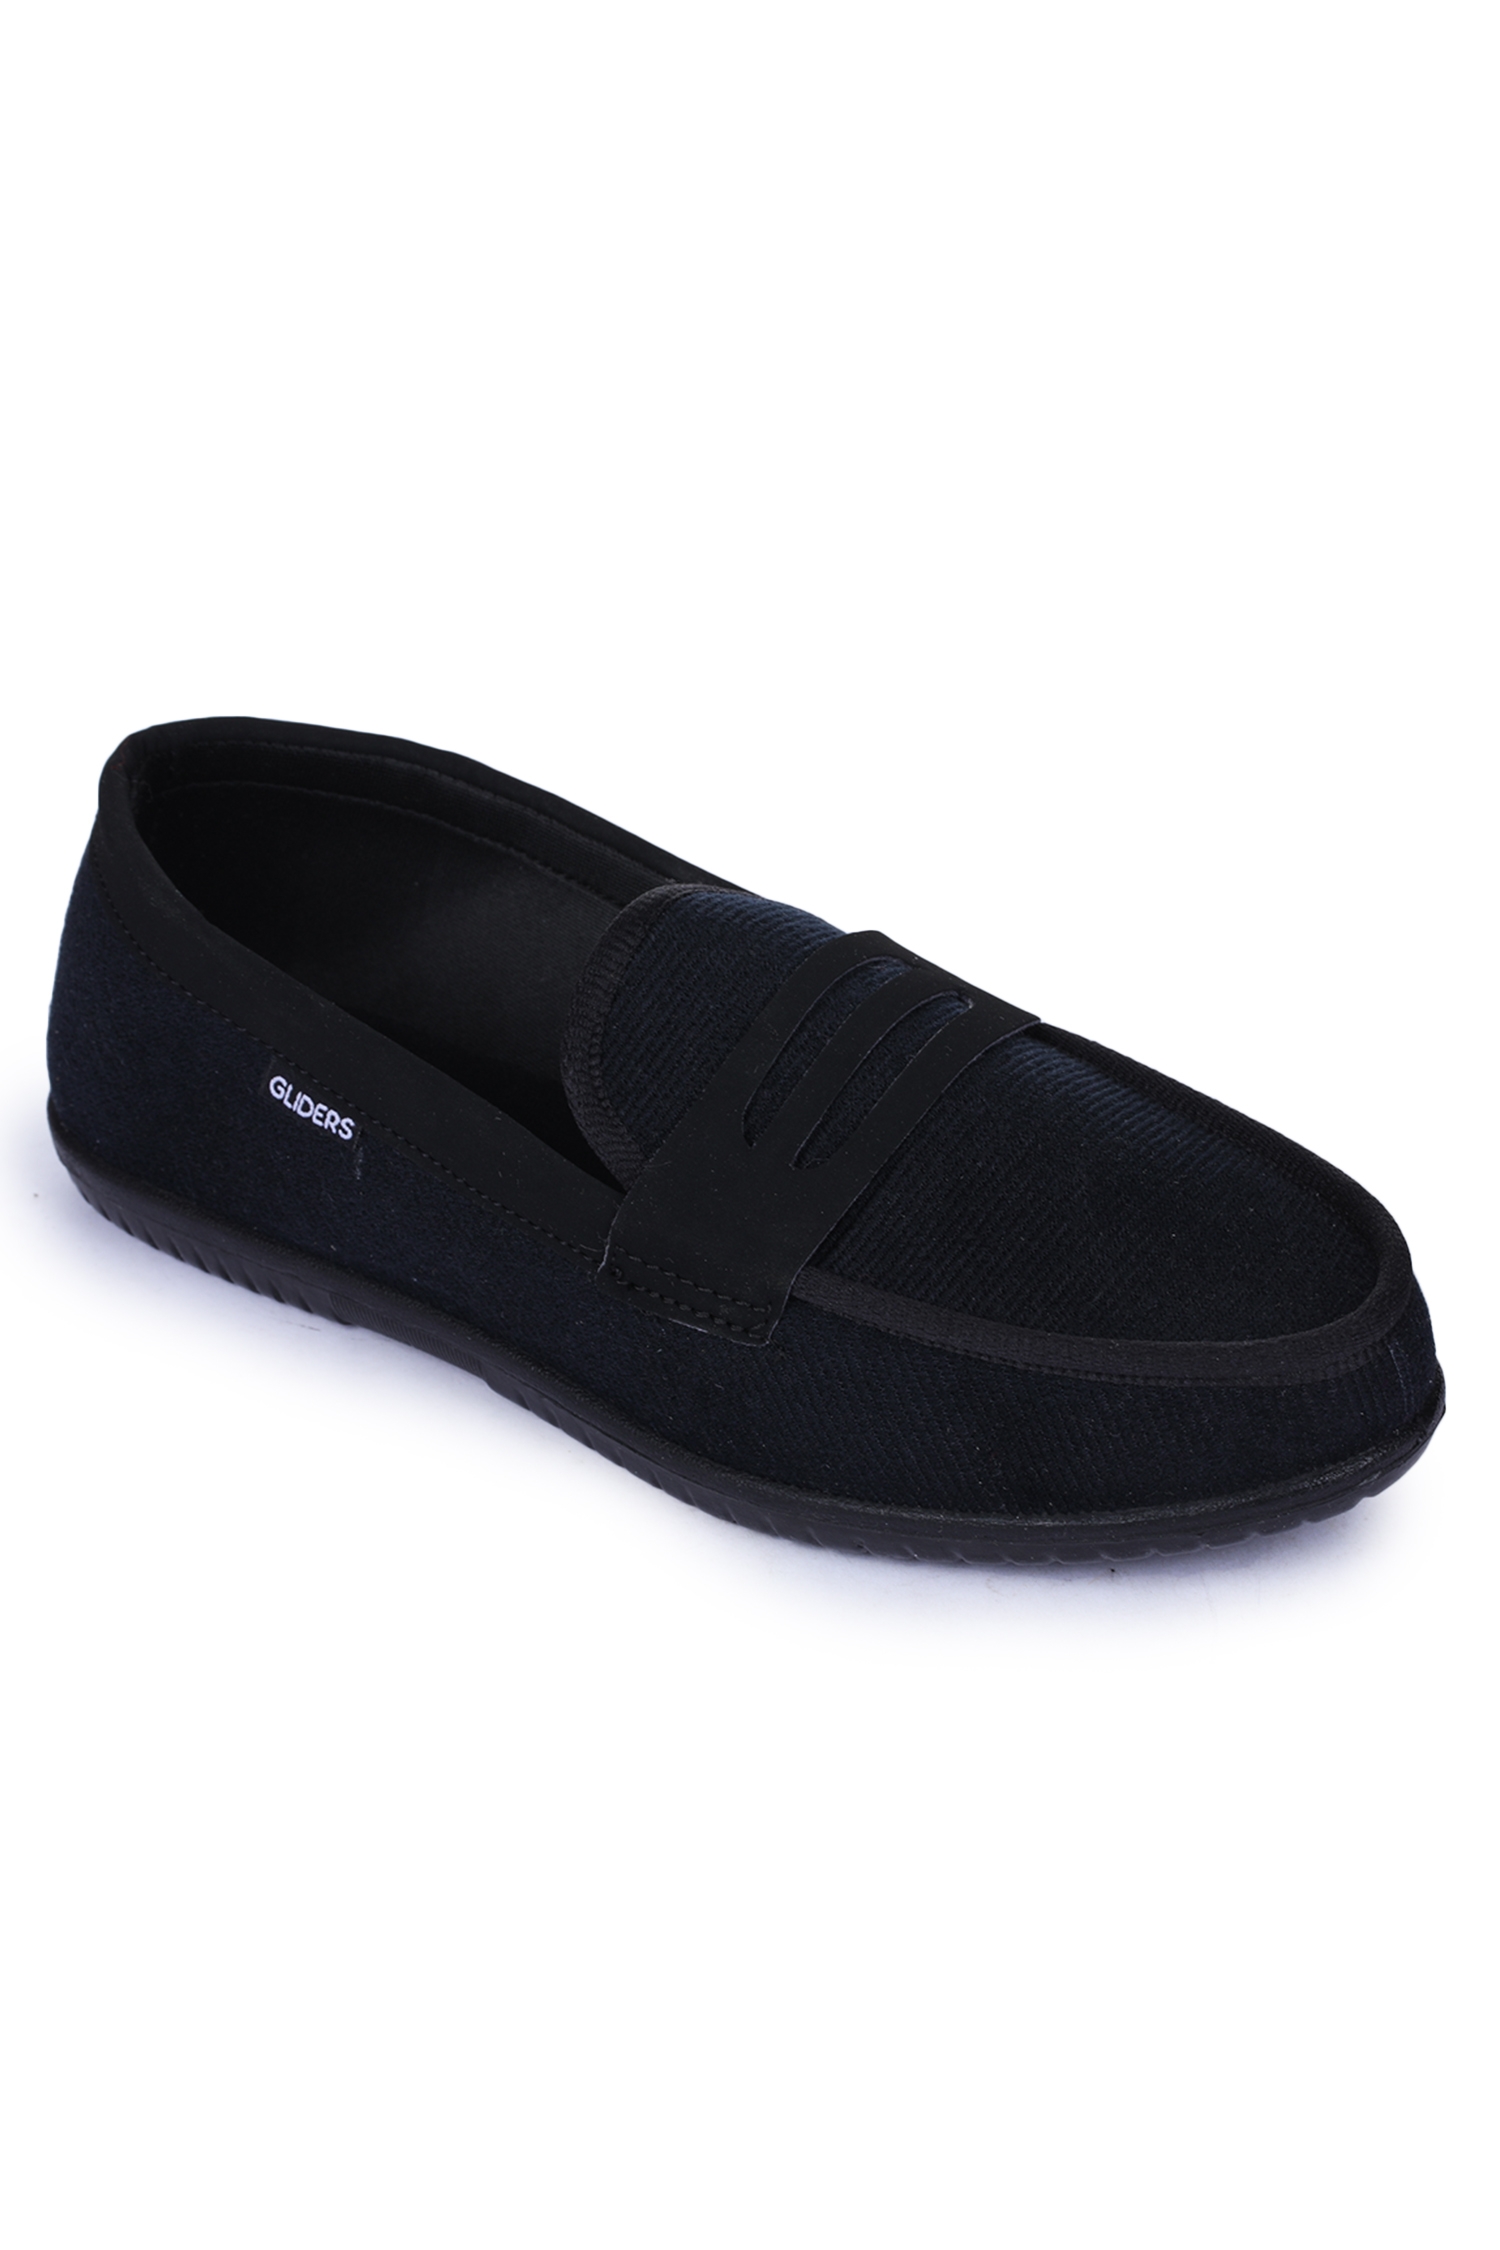 Gliders by Liberty EXCITOR Black Casual Shoes for Men